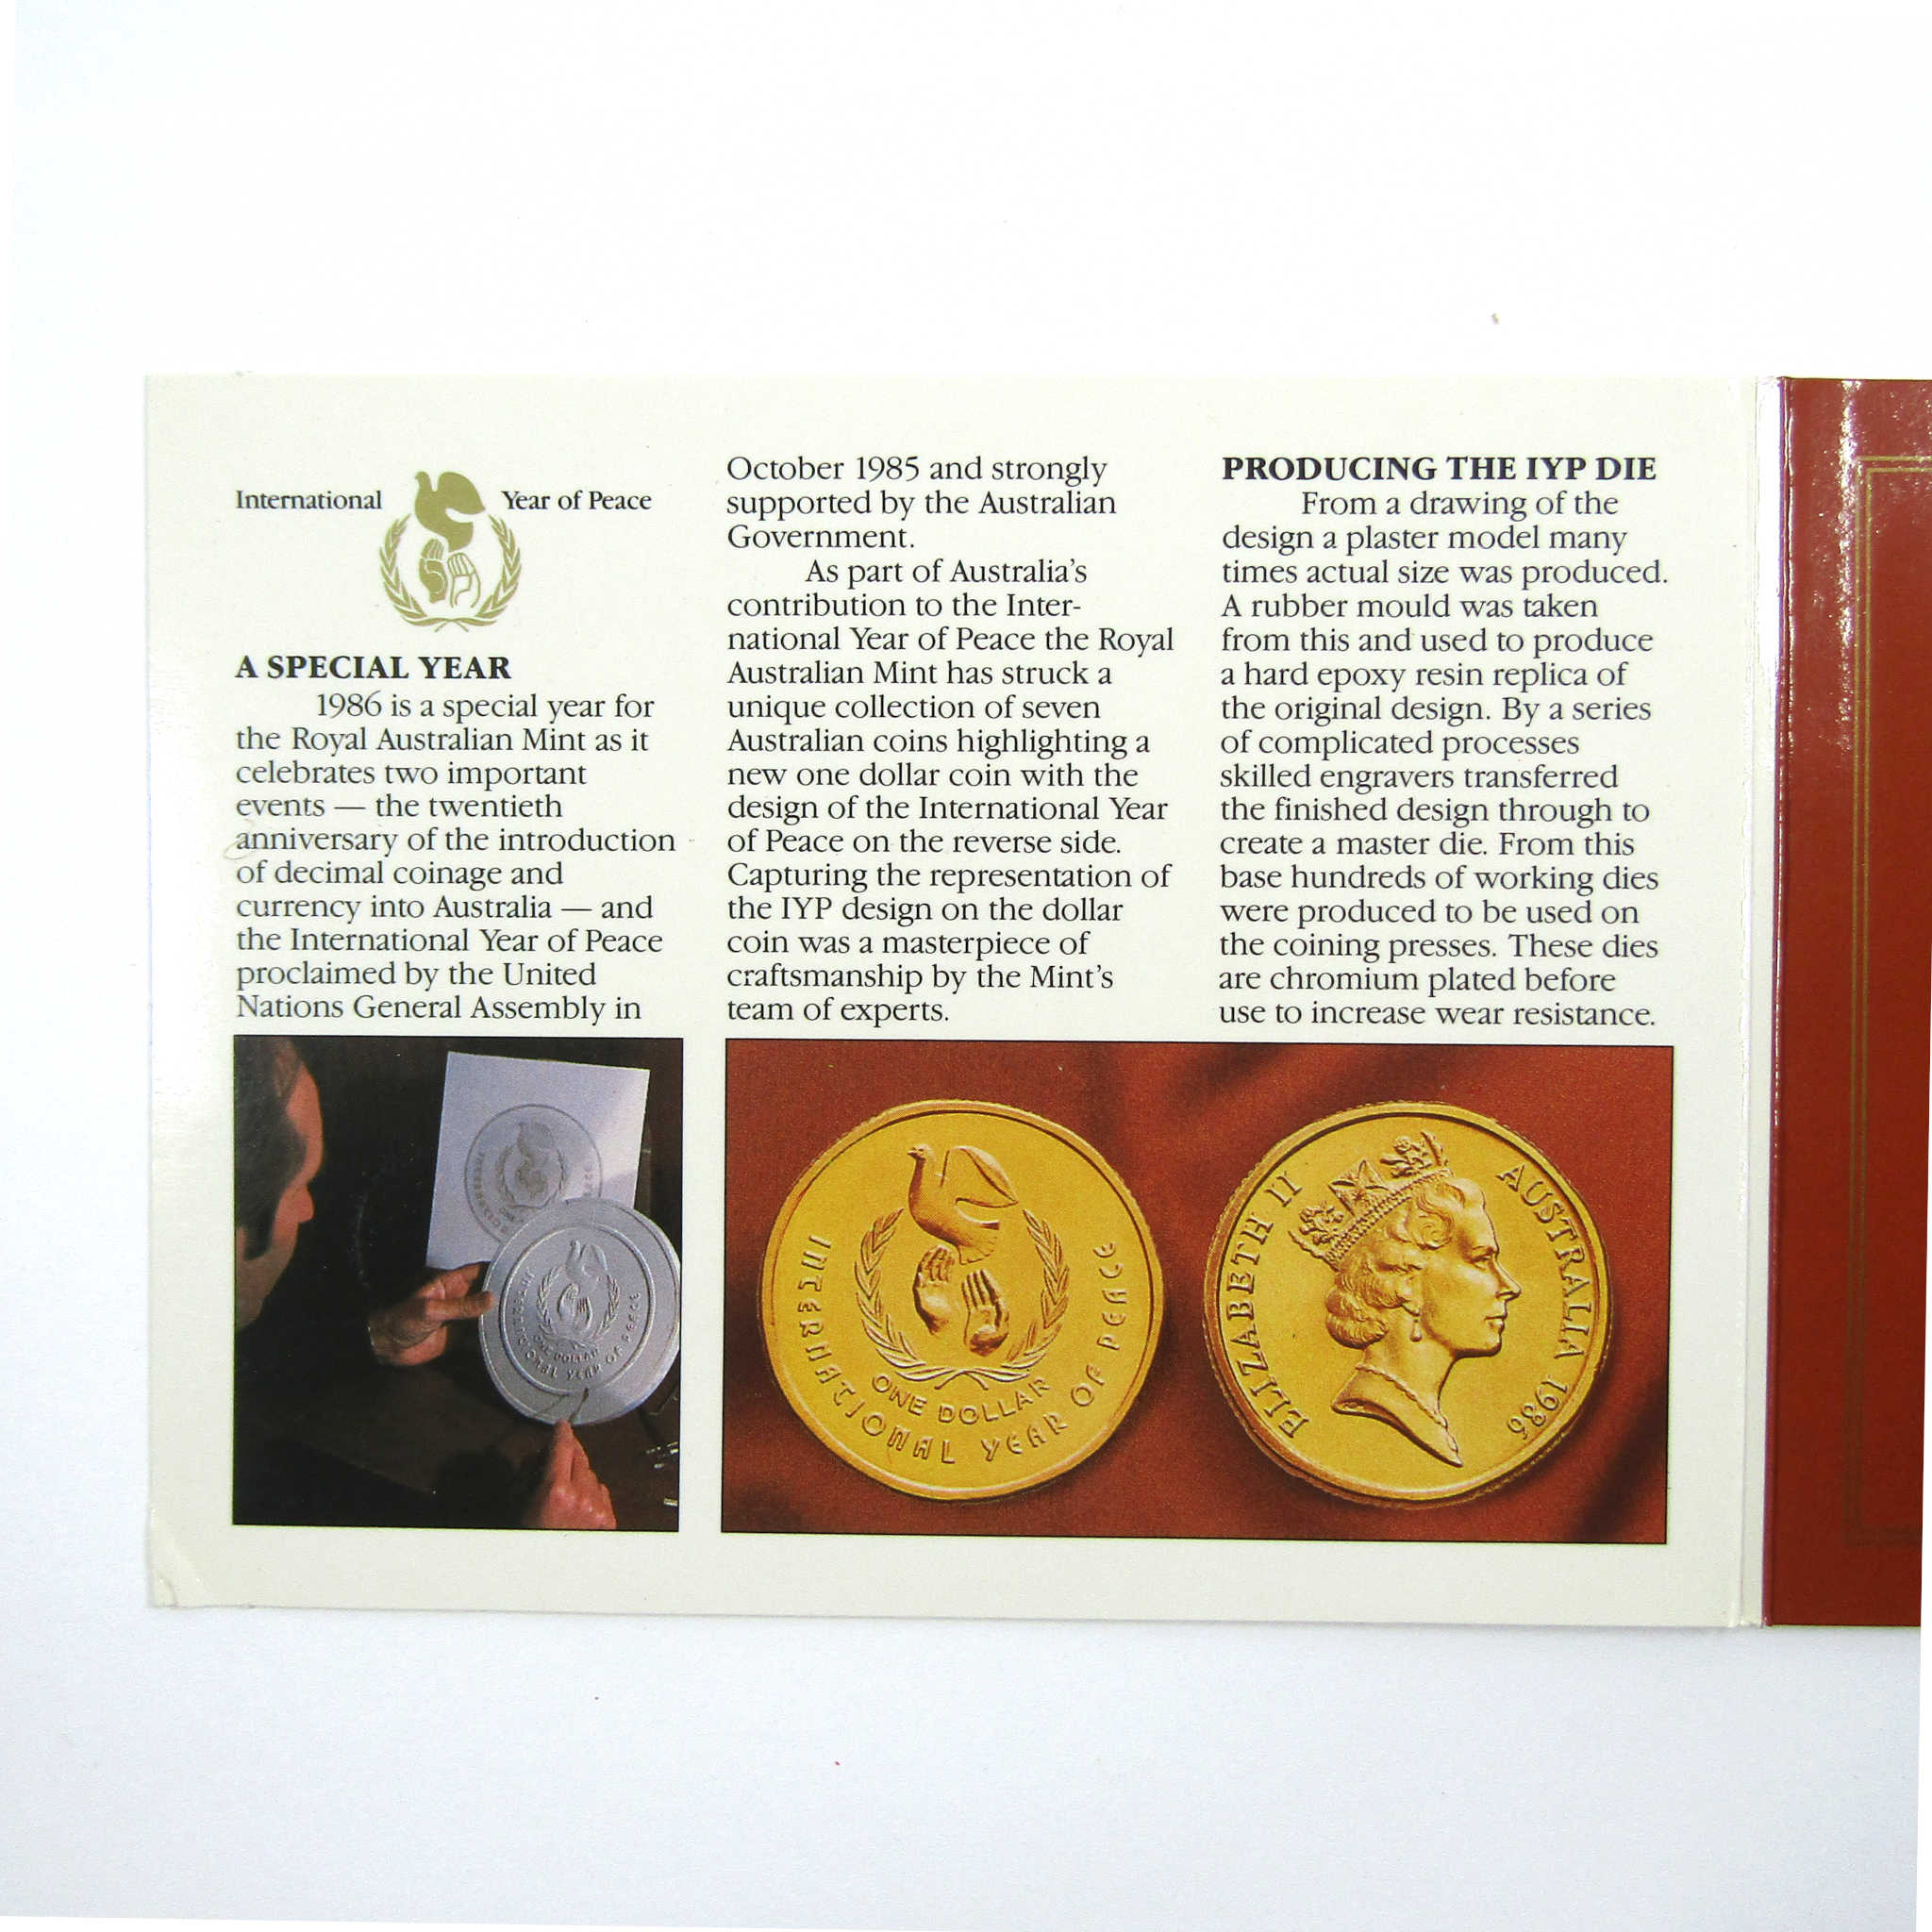 1986 Australian Year of Peace Uncirculated Coin Collection SKU:CPC6217